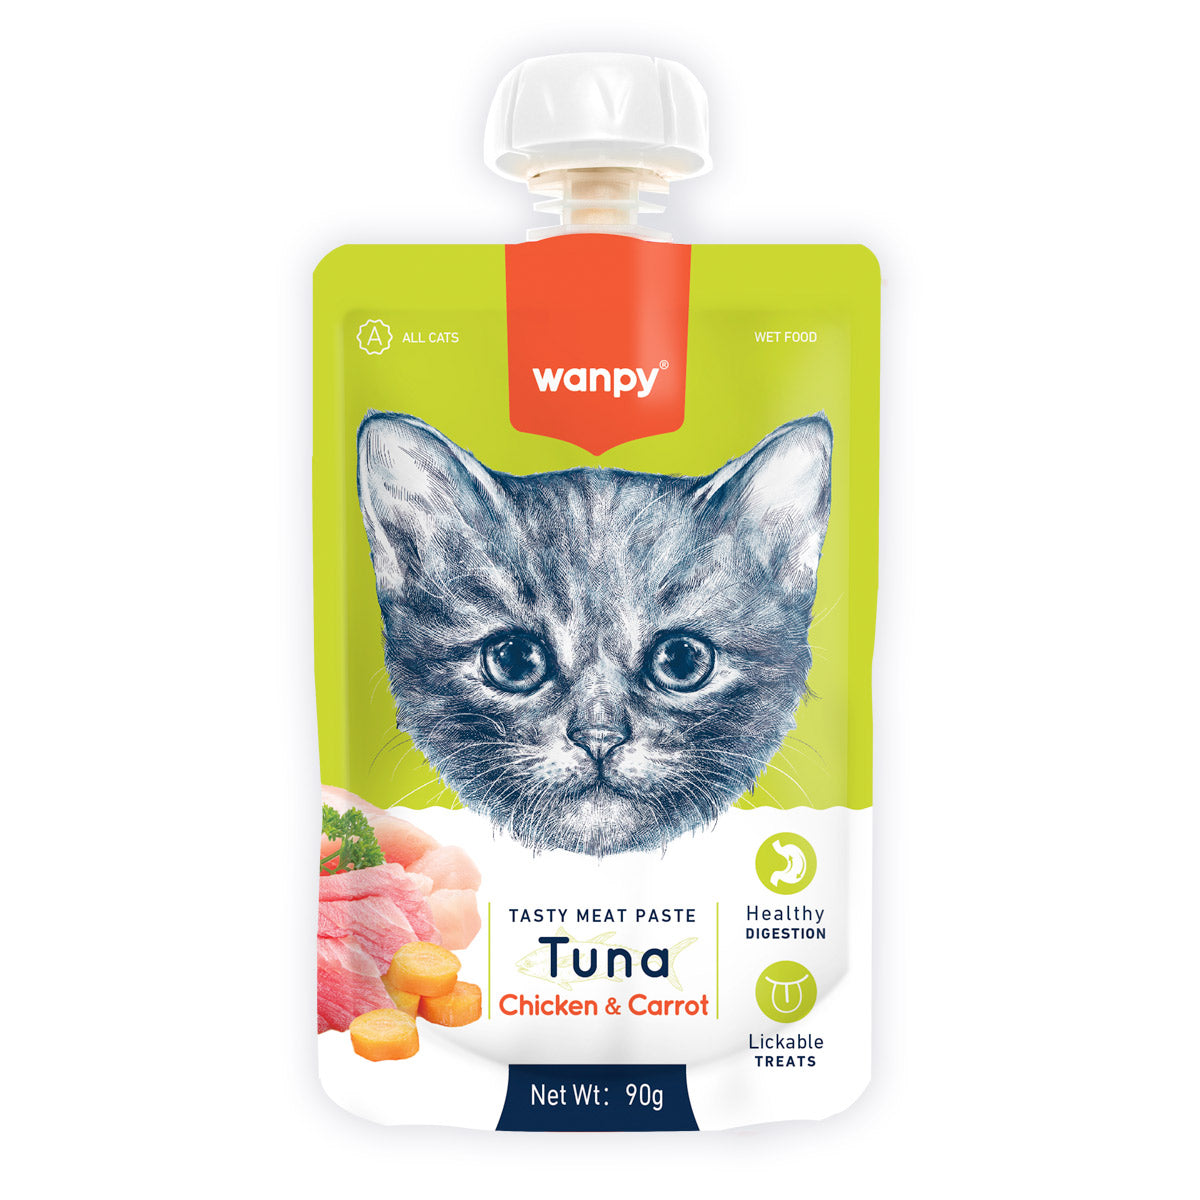 Wanpy Tasty Meat Paste Tuna, Chicken and Carrot for Cats 90g